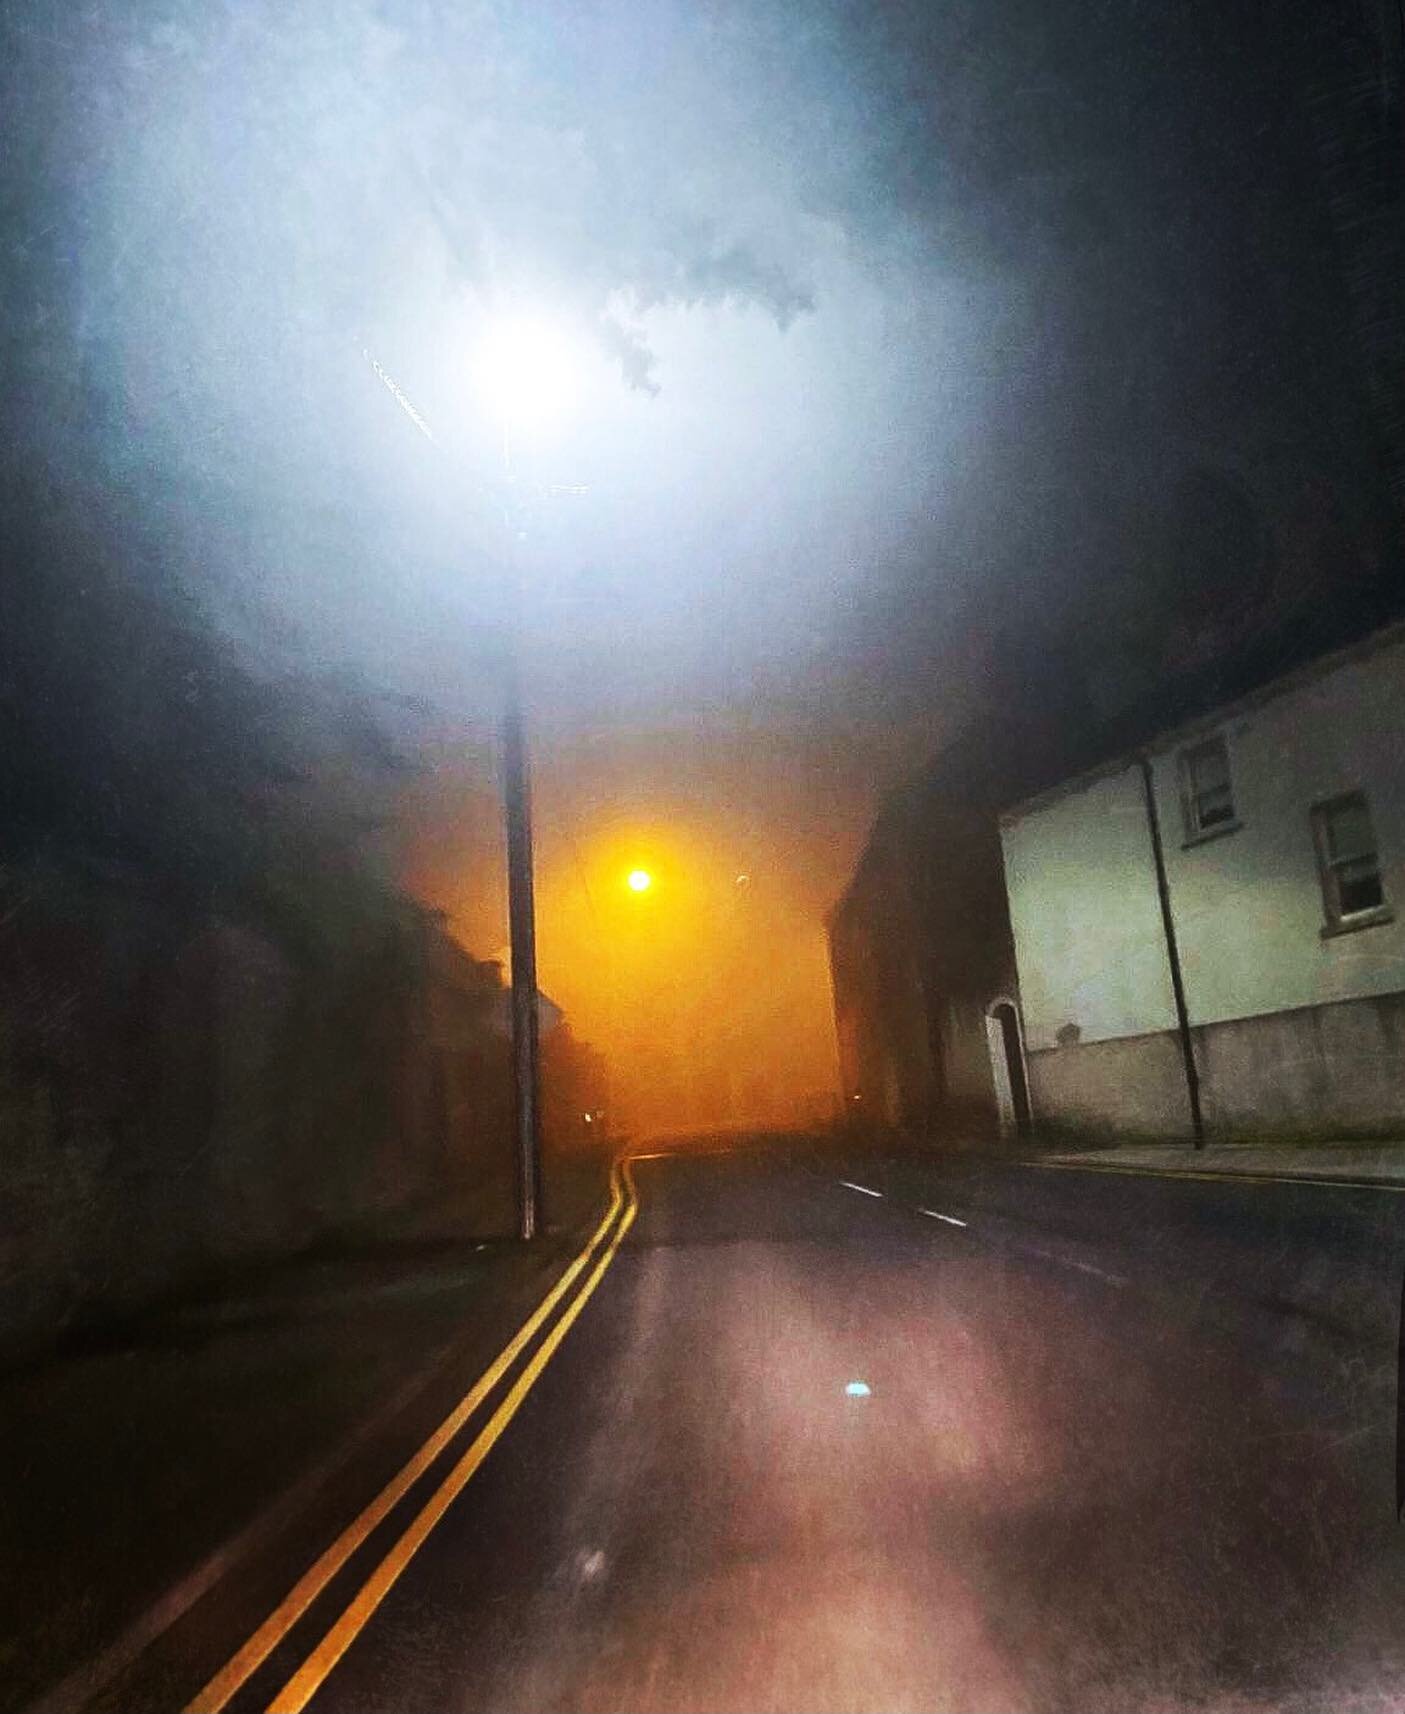 The Road Home. #nighttime #nightscape #corkcity #lockdown #lookingforanswers #colourising #cityliving #escapes